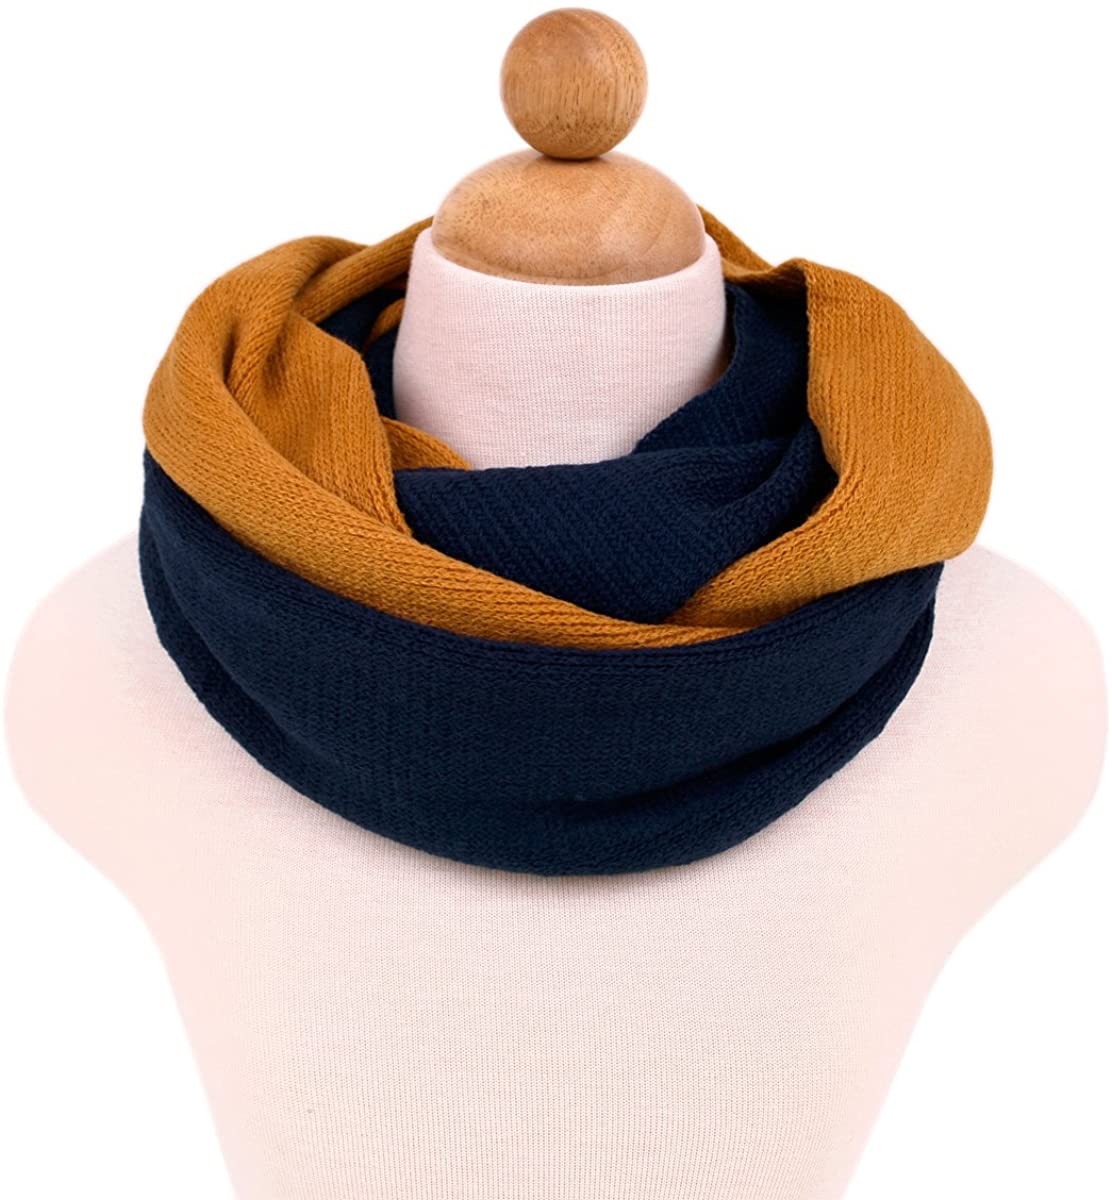 Two-Tone Winter Knit Warm Infinity Loop Circle Scarf